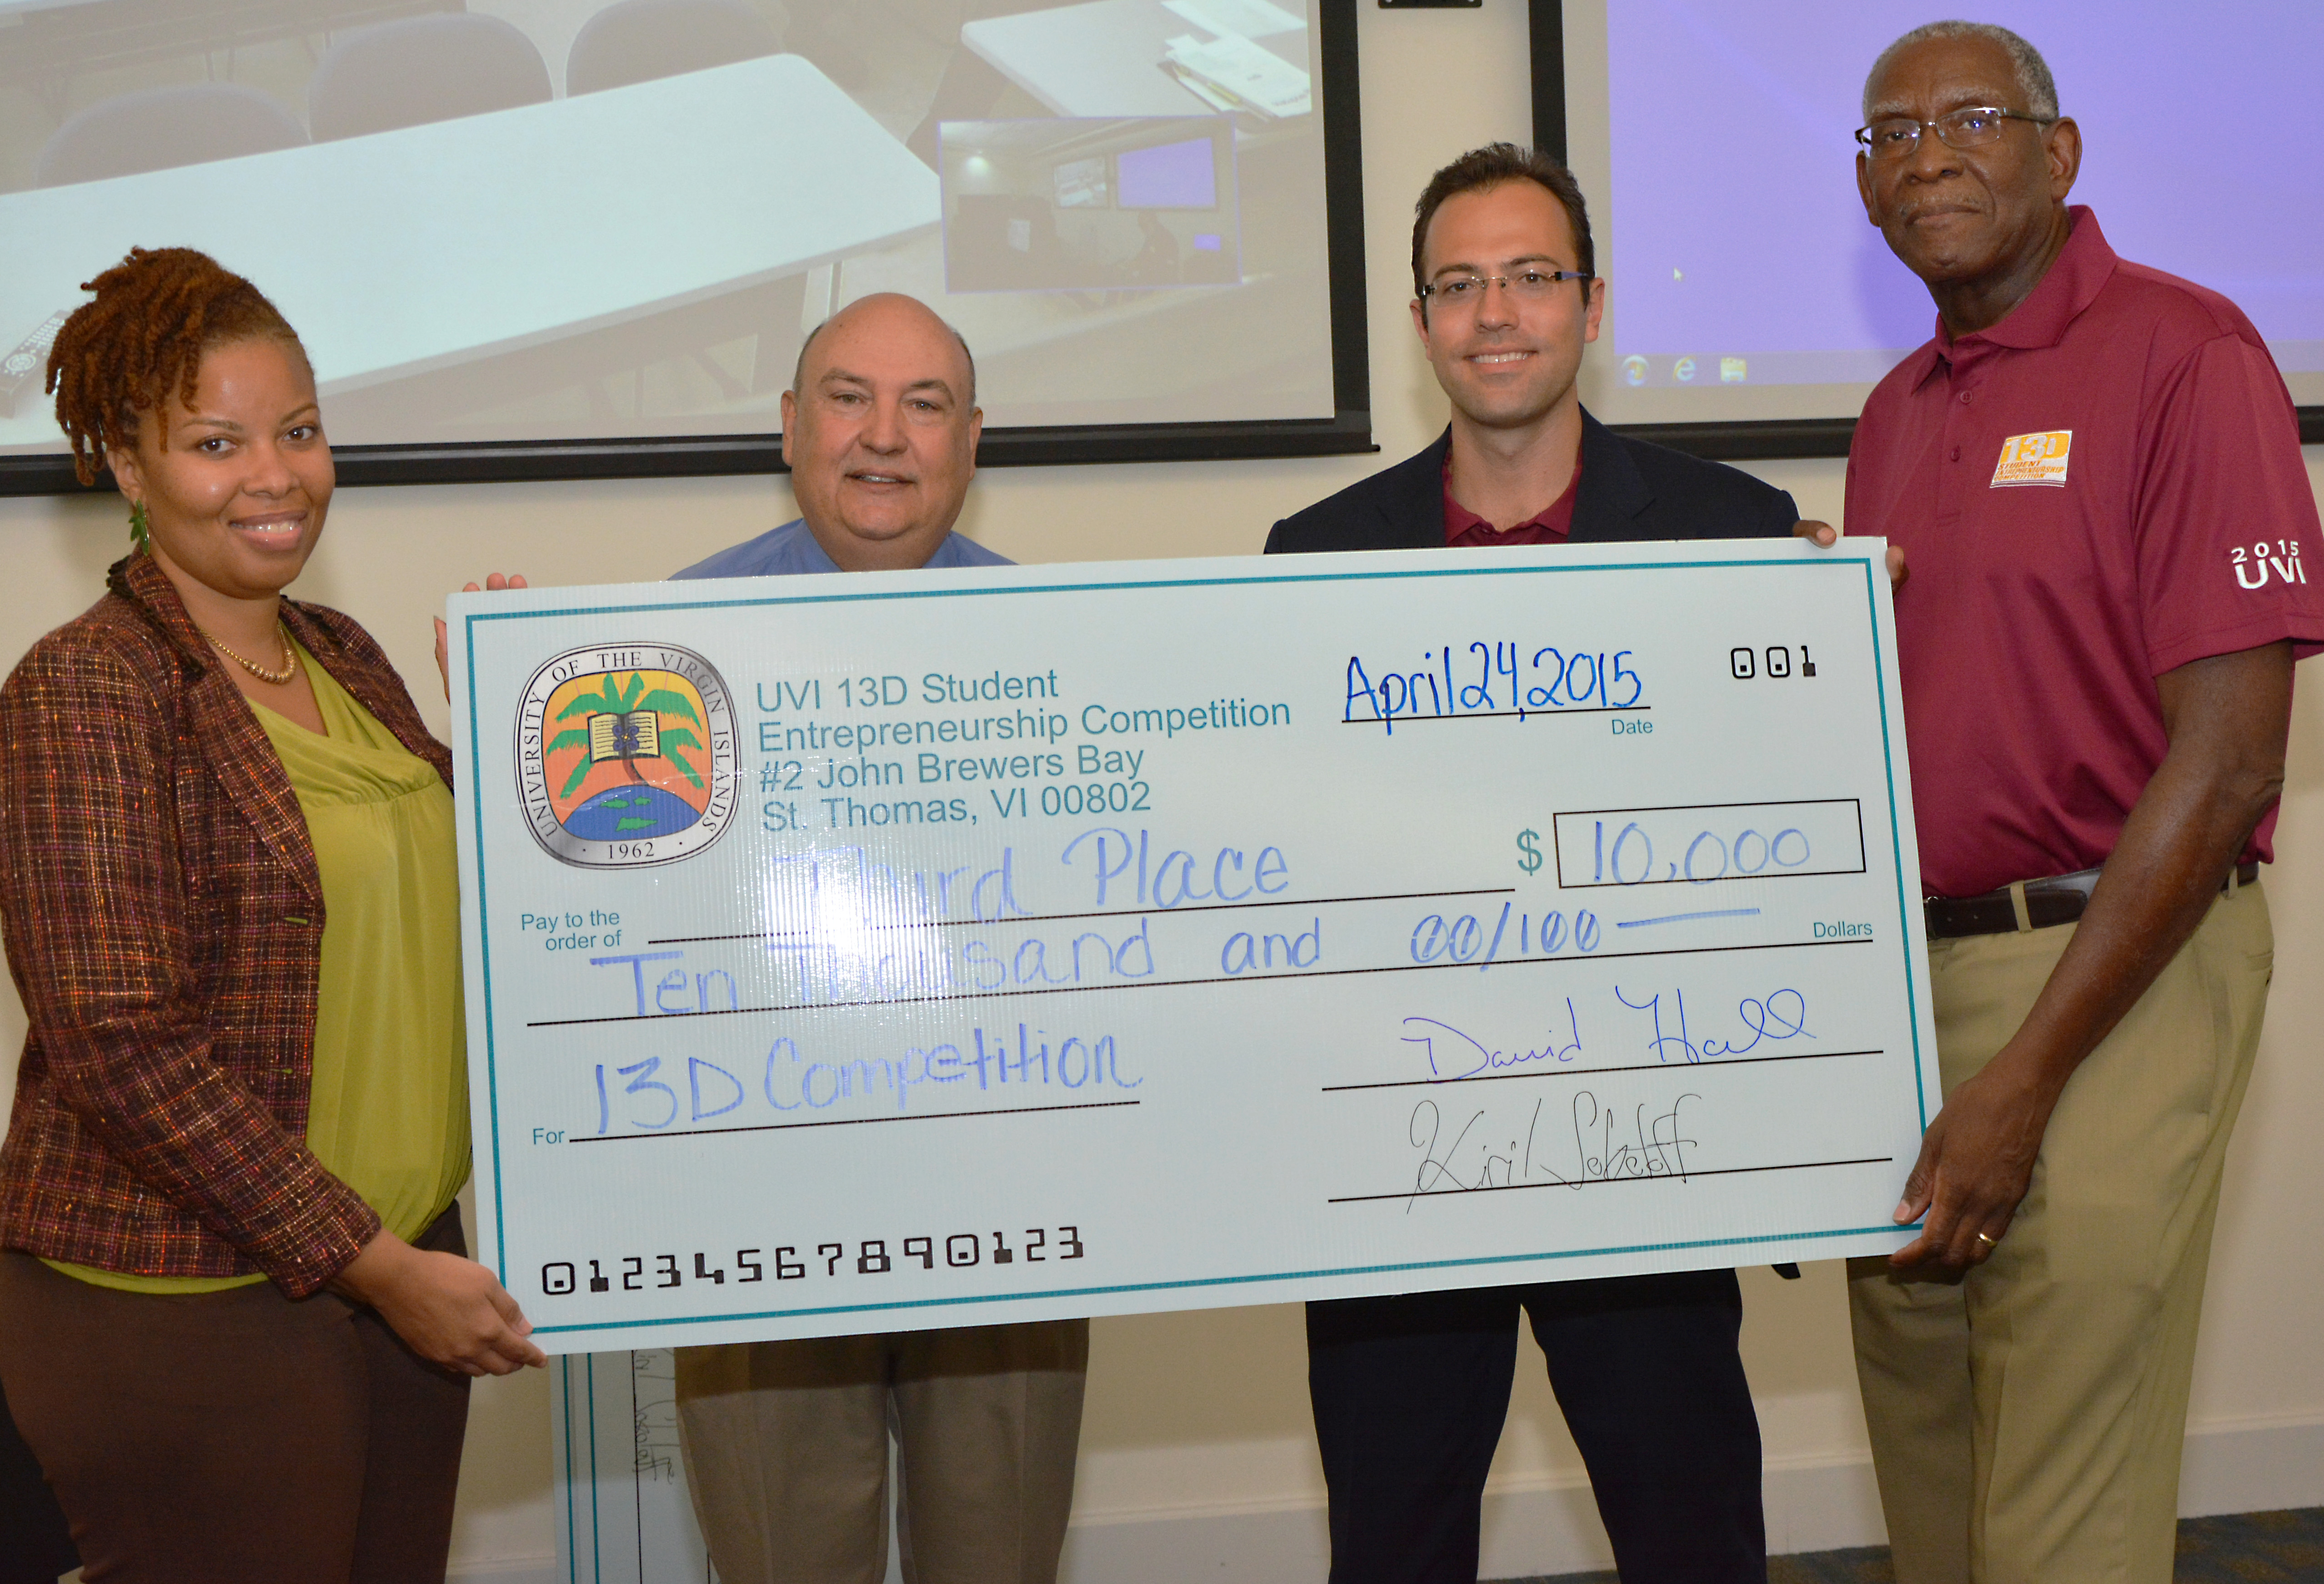 UVI 13D Winner Gelise David, 13D Coordinator Dr. Glenn Metts, Jonathan Gula of 13D and UVI President David Hall pose for a photo after the 13D Student Entrepreneurship Competition. 